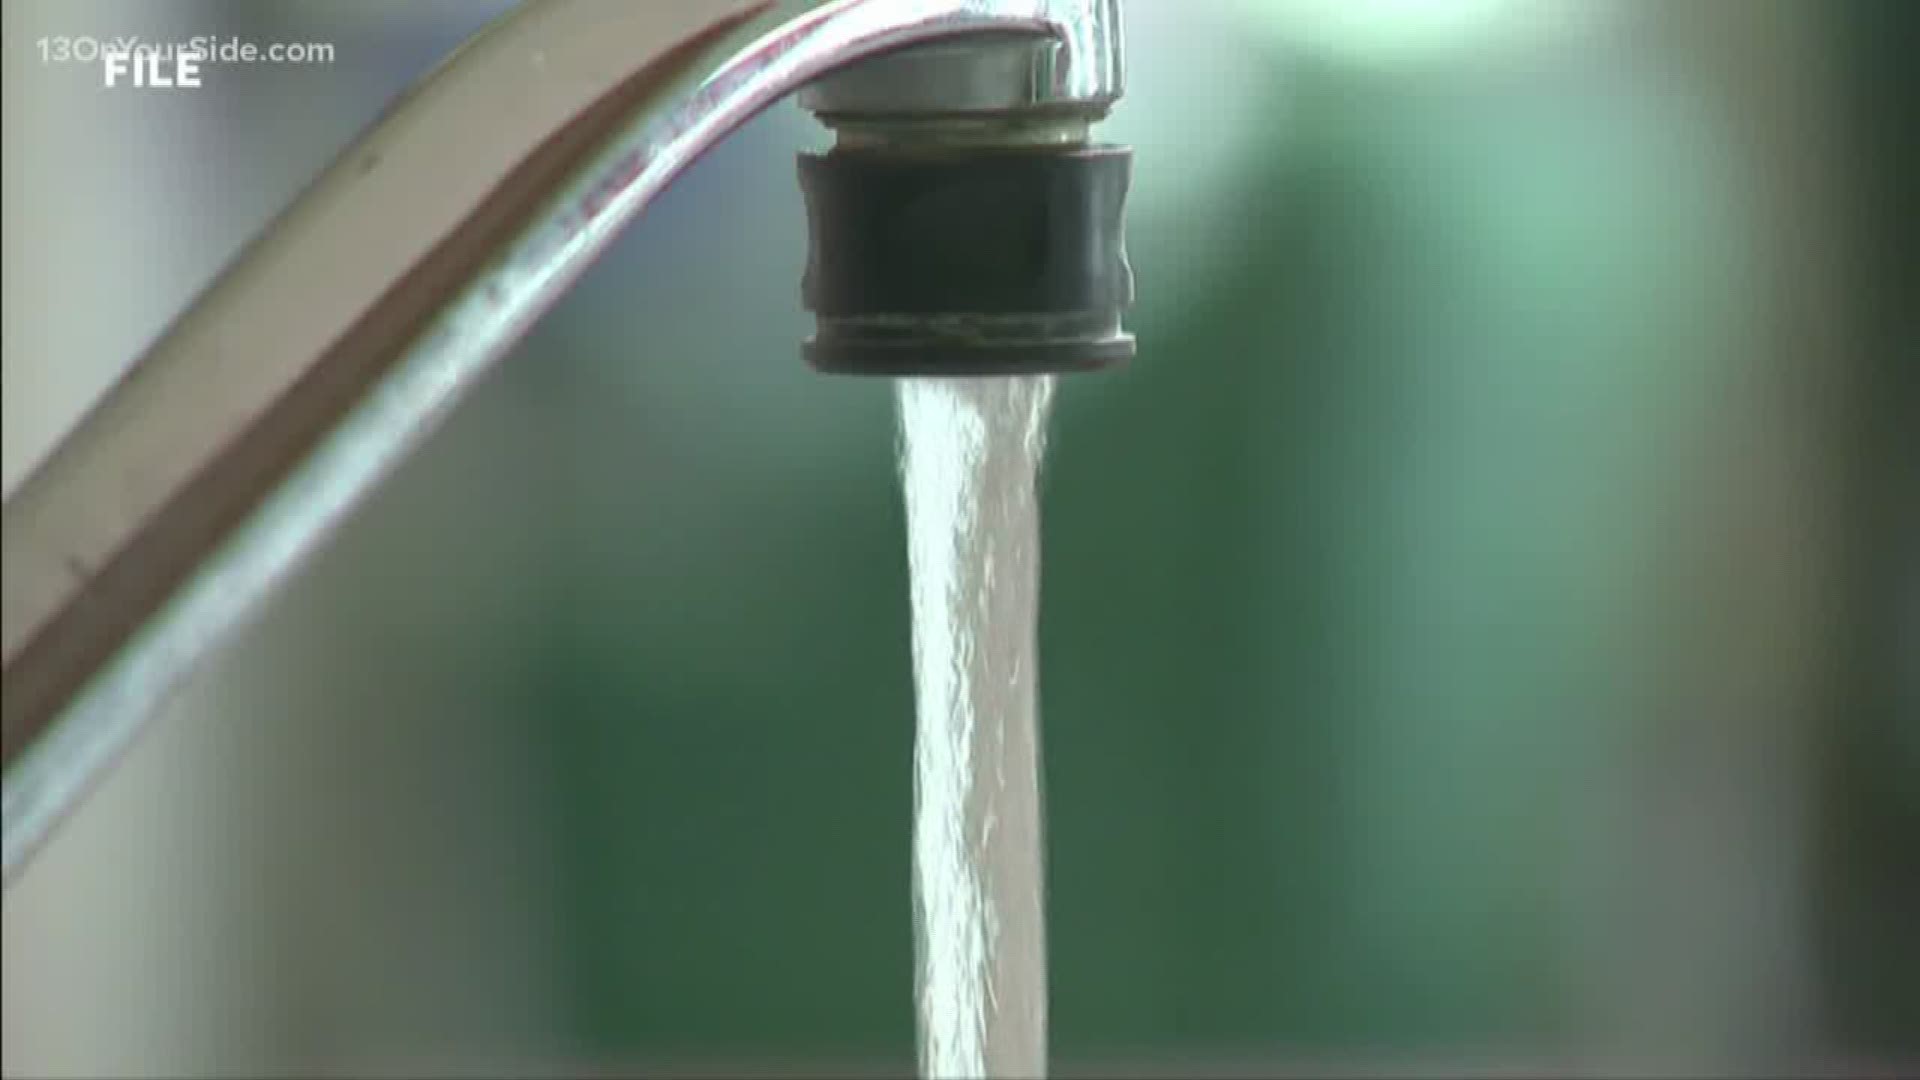 The City of Grand Rapids sent a letter to homes suspected or known to have lead service lines.